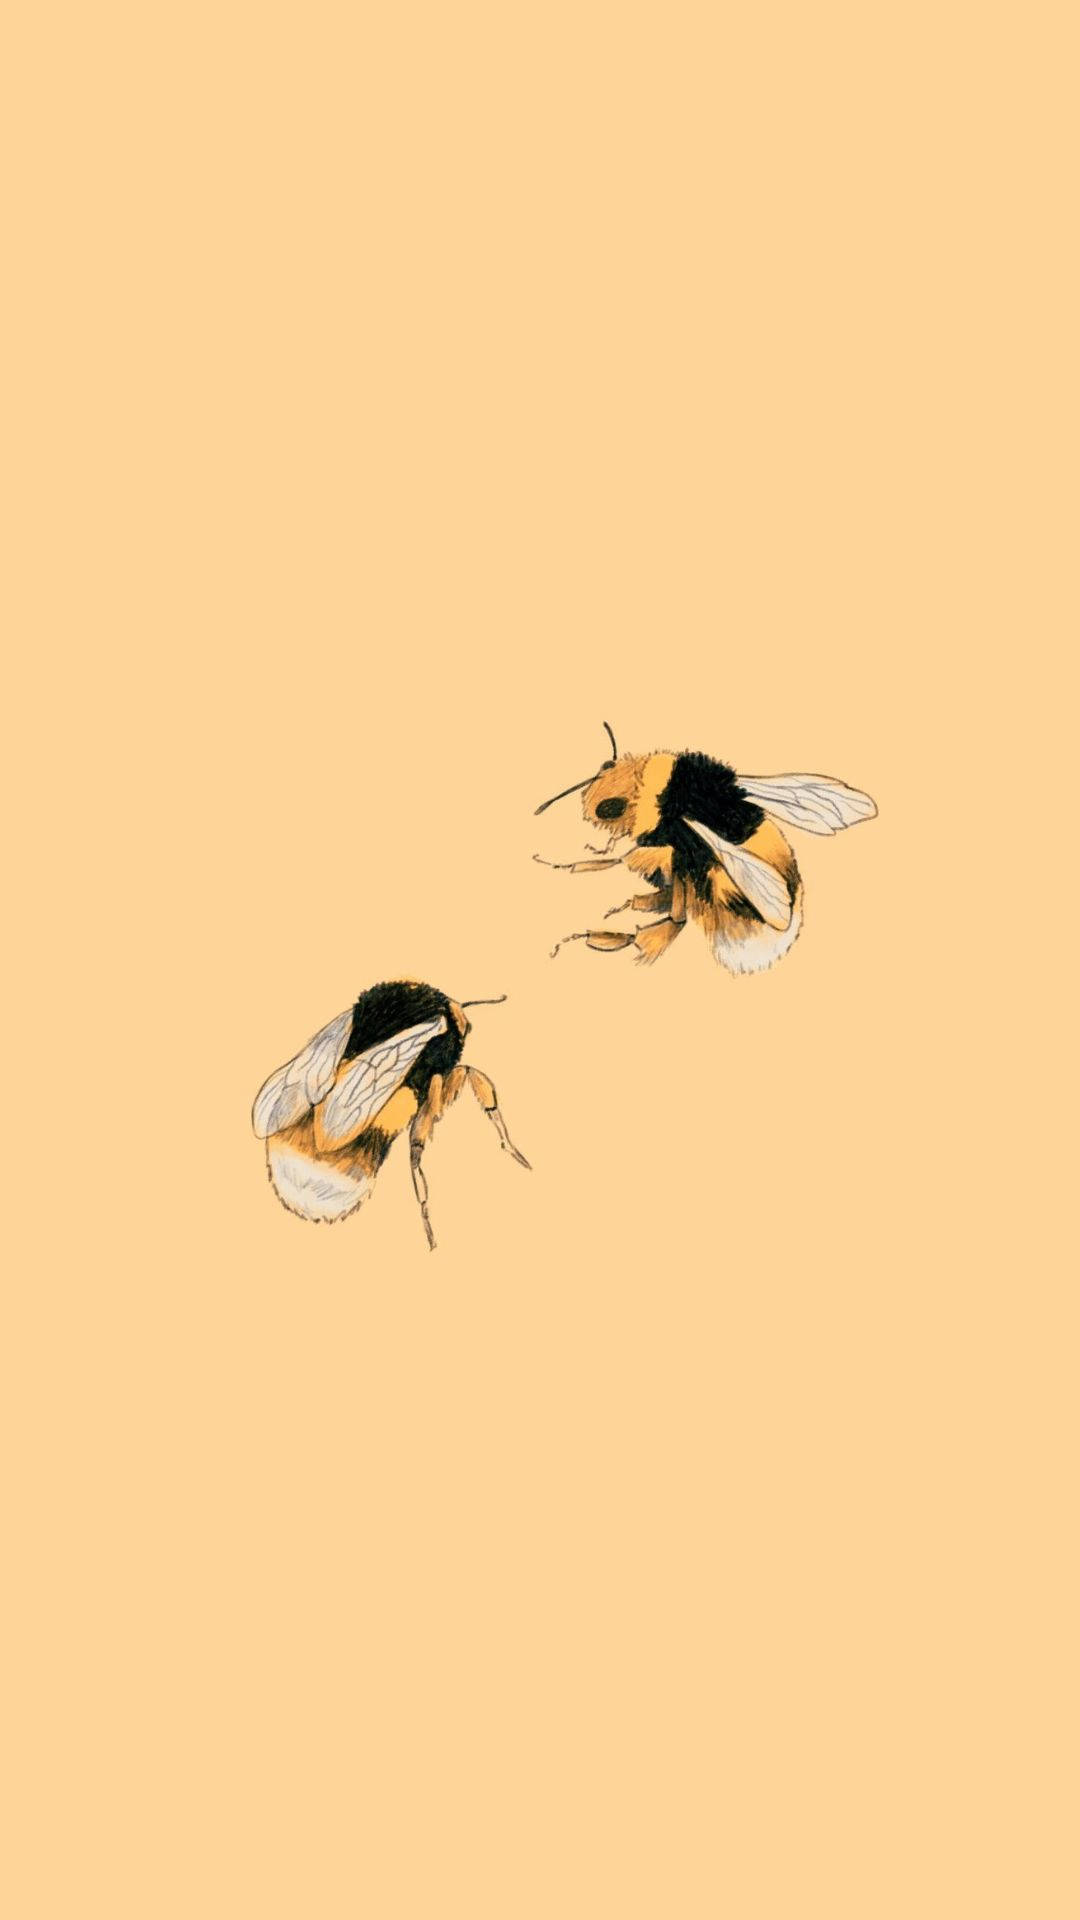 Aesthetic Profile Bees Wallpaper